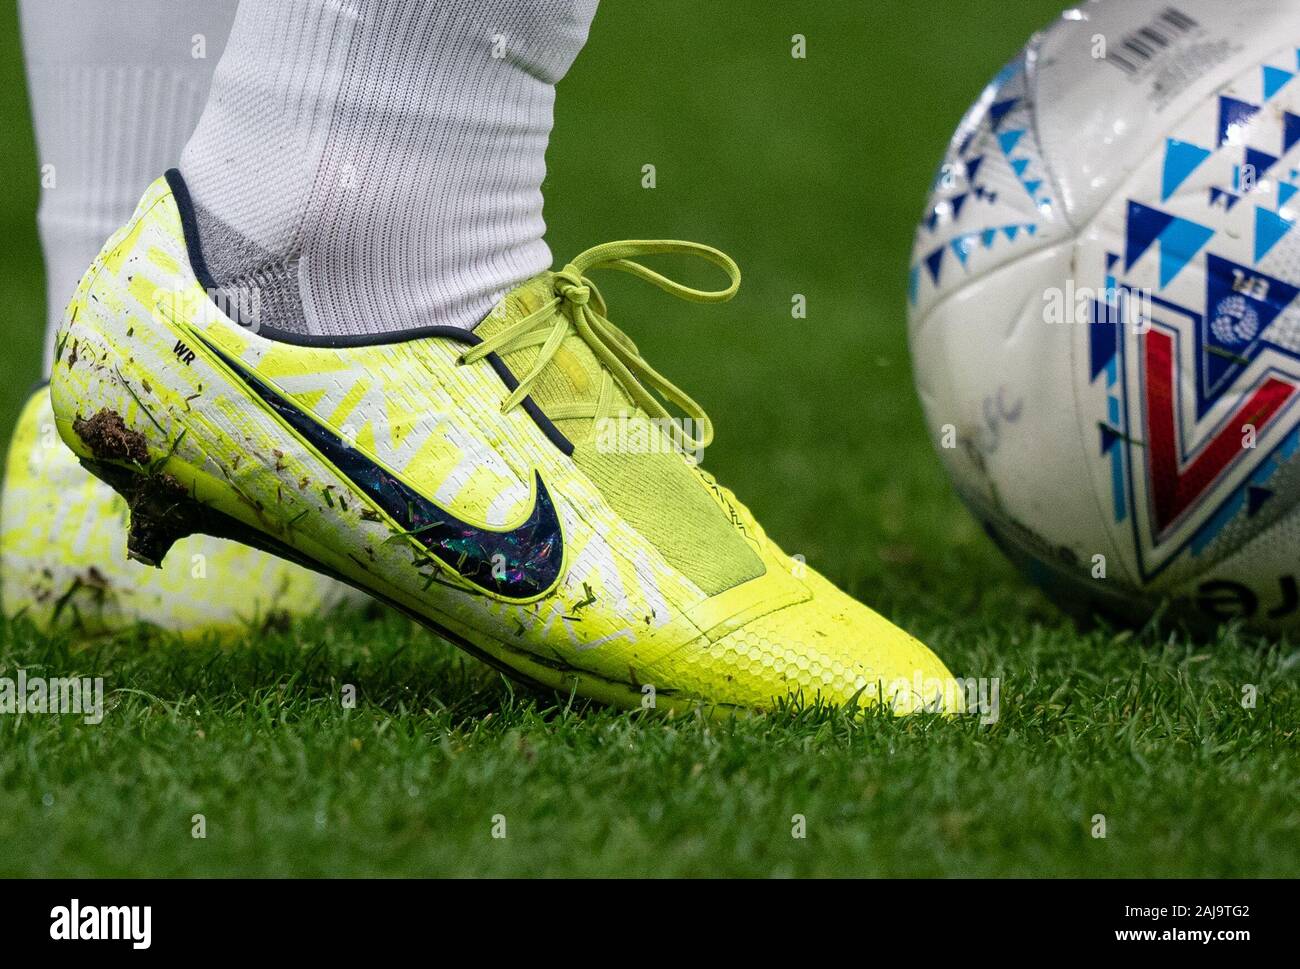 Derby, UK. 02nd Jan, 2020. The Nike Phantom football boots of Wayne Rooney  (Player-Coach) of Derby County during the Sky Bet Championship match  between Derby County and Barnsley at the Ipro Stadium,